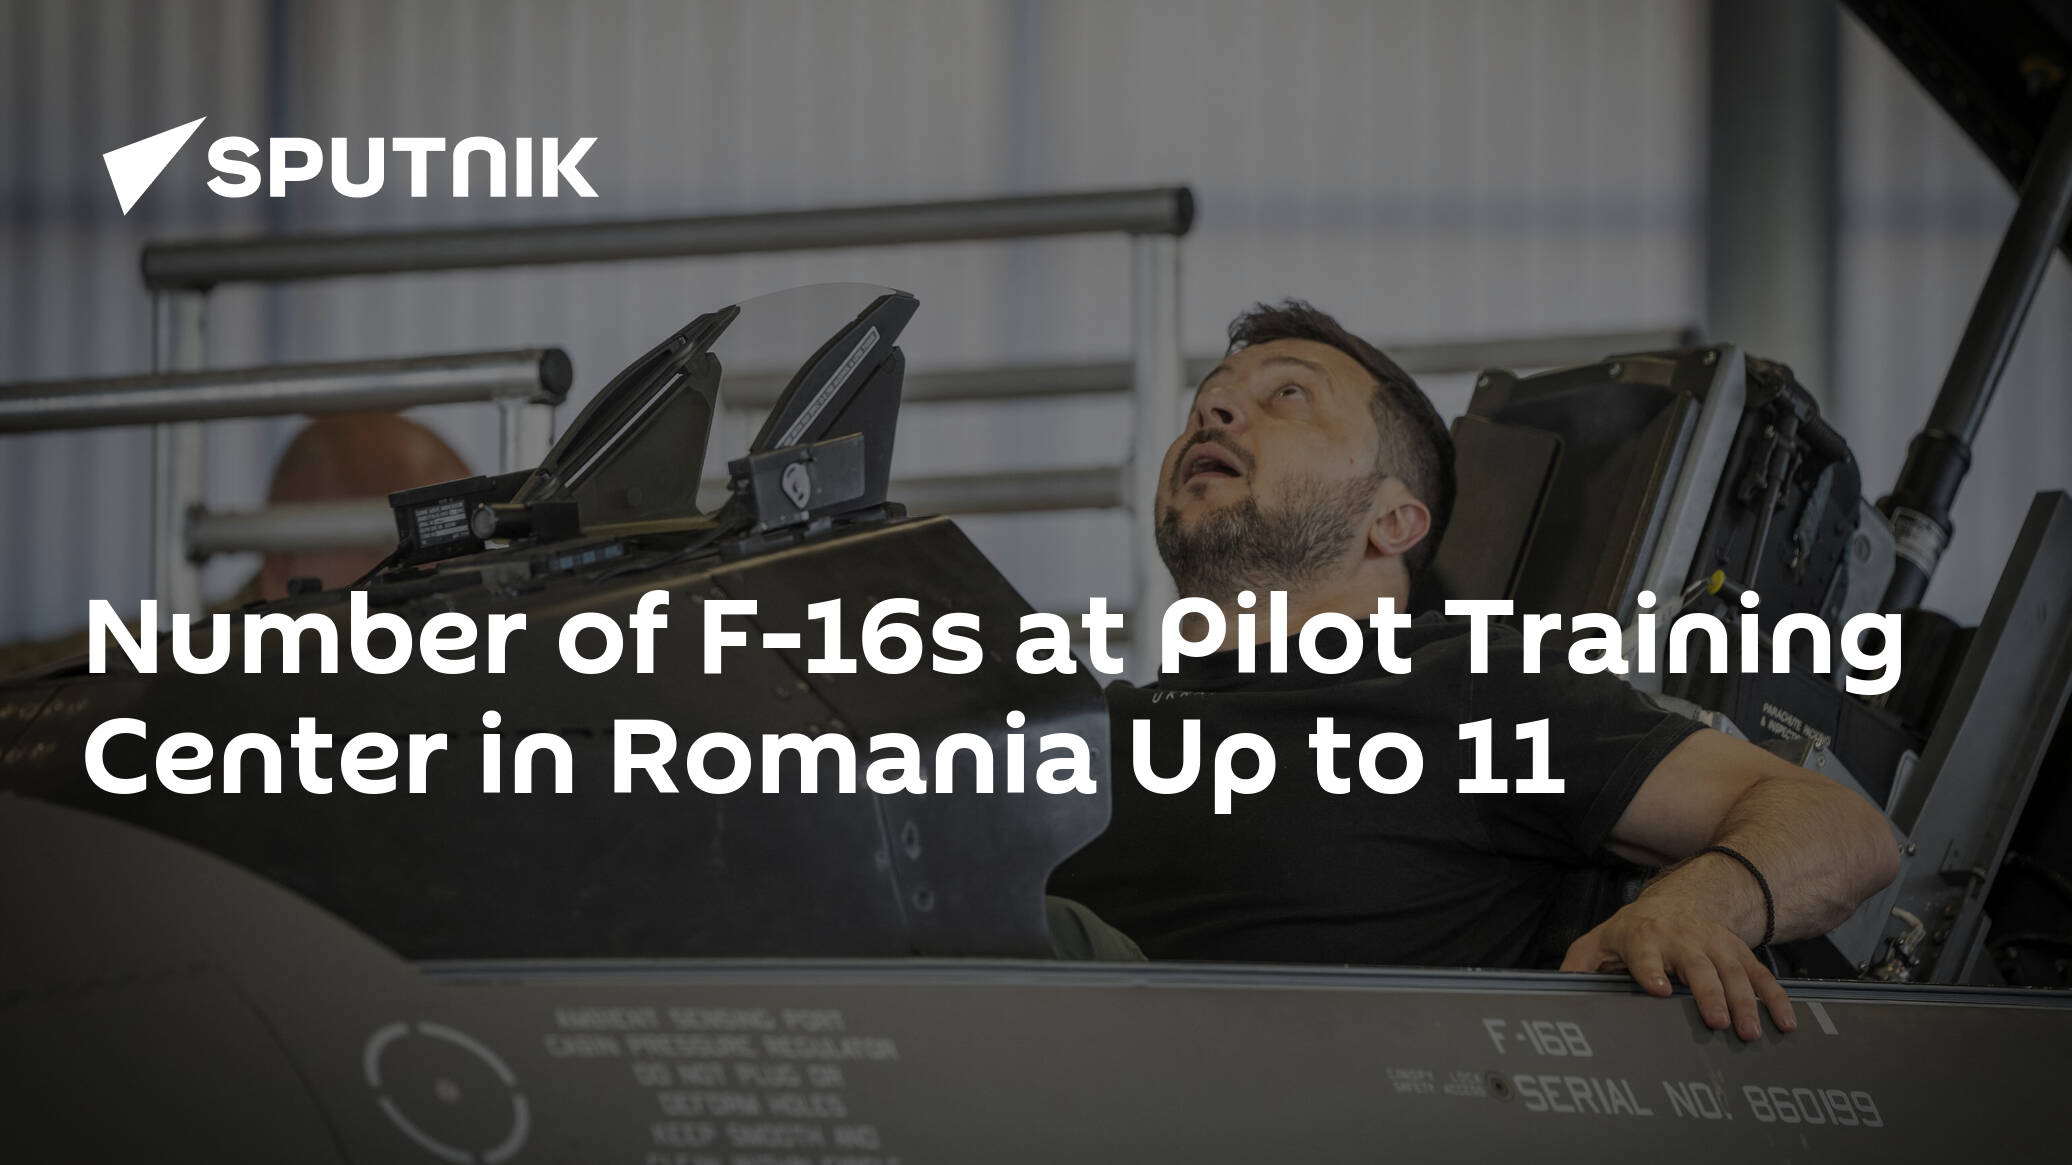 Number of F-16s at Pilot Training Center in Romania Up to 11